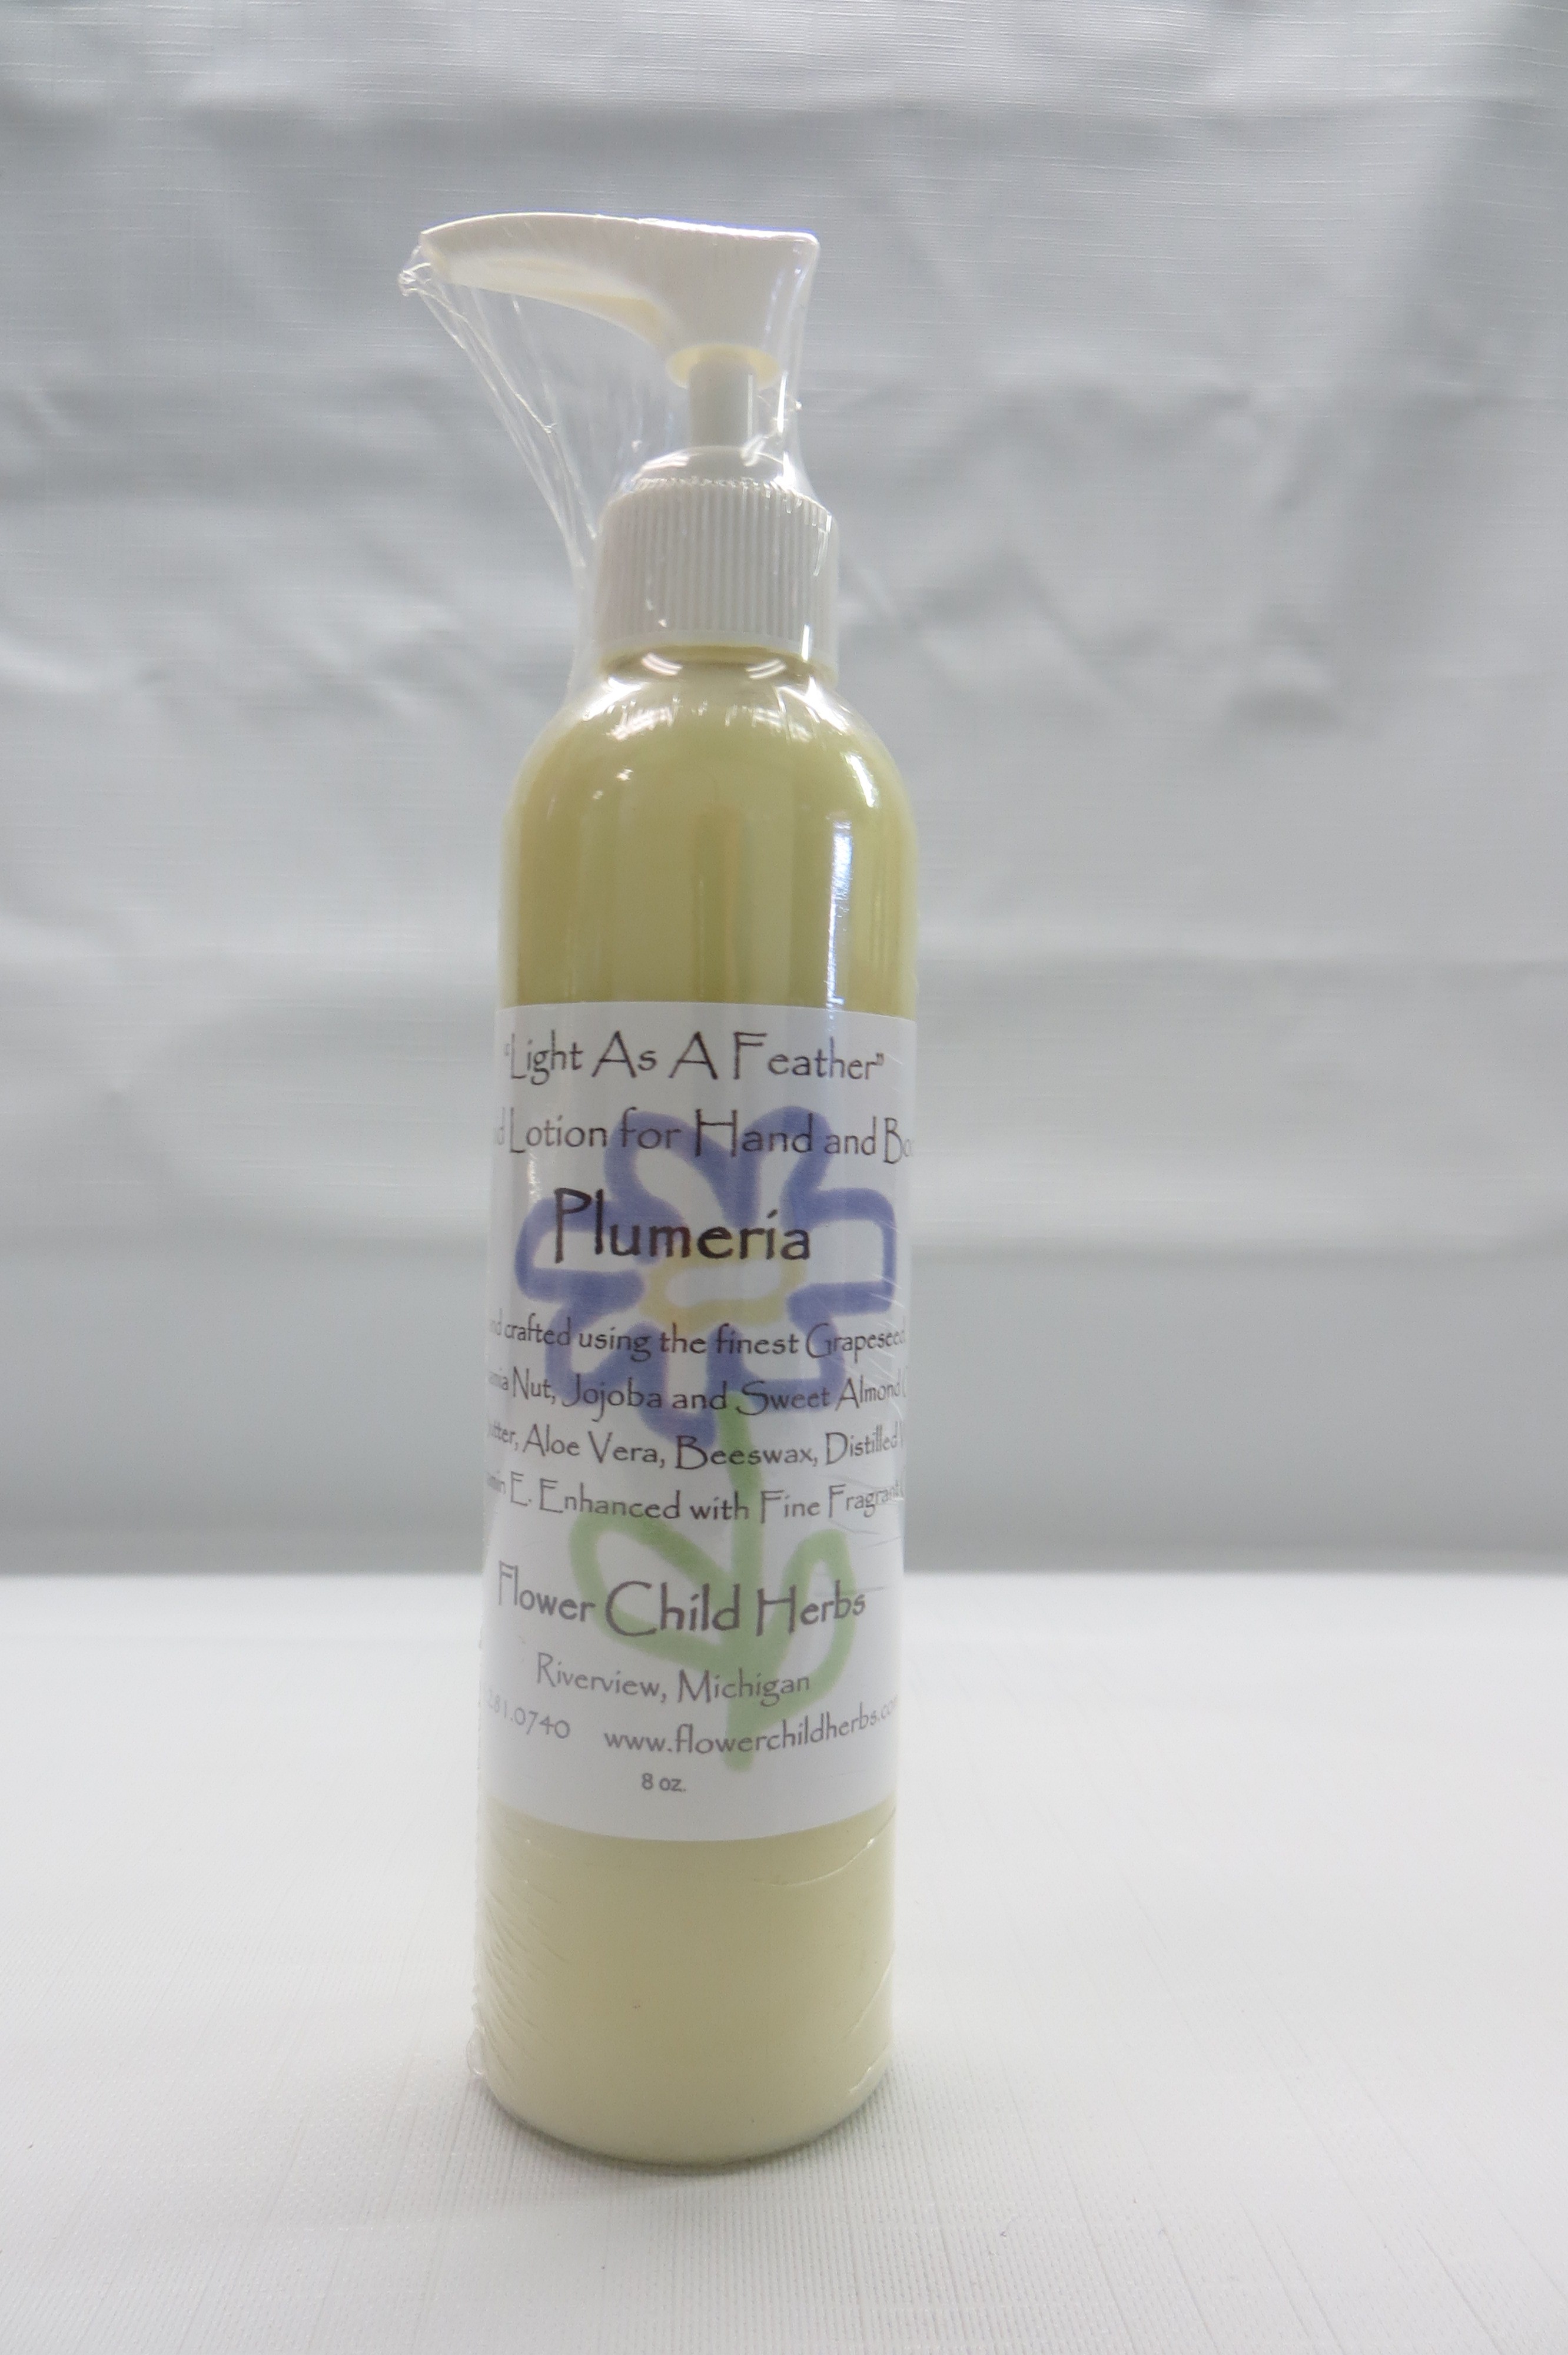 Plumeria "Light as a Feather" Lotion